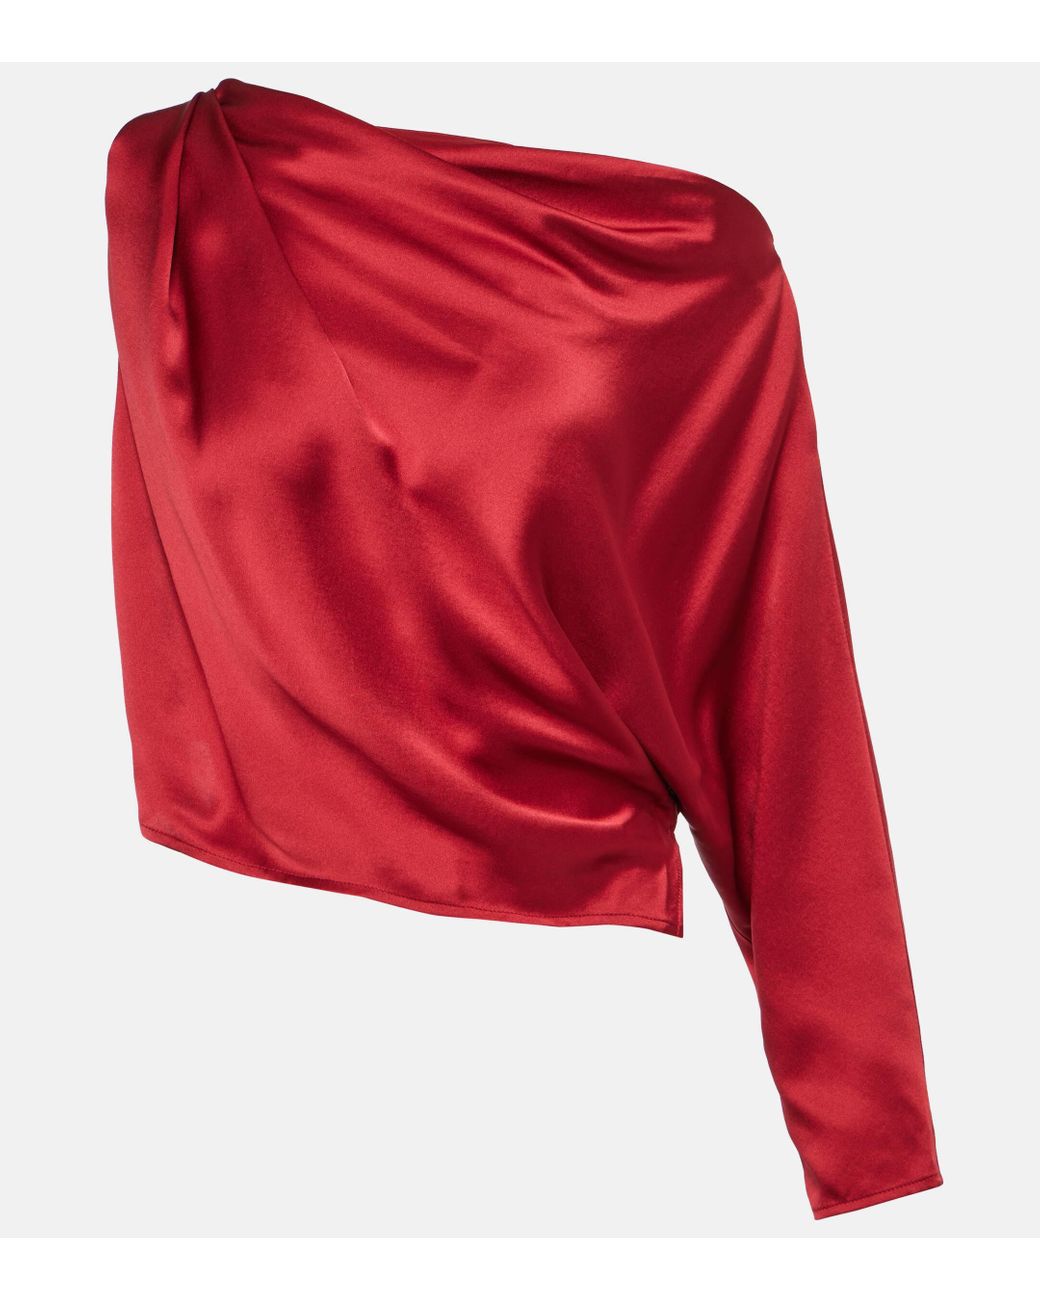 The Sei Draped One-shoulder Silk Satin Top in Red